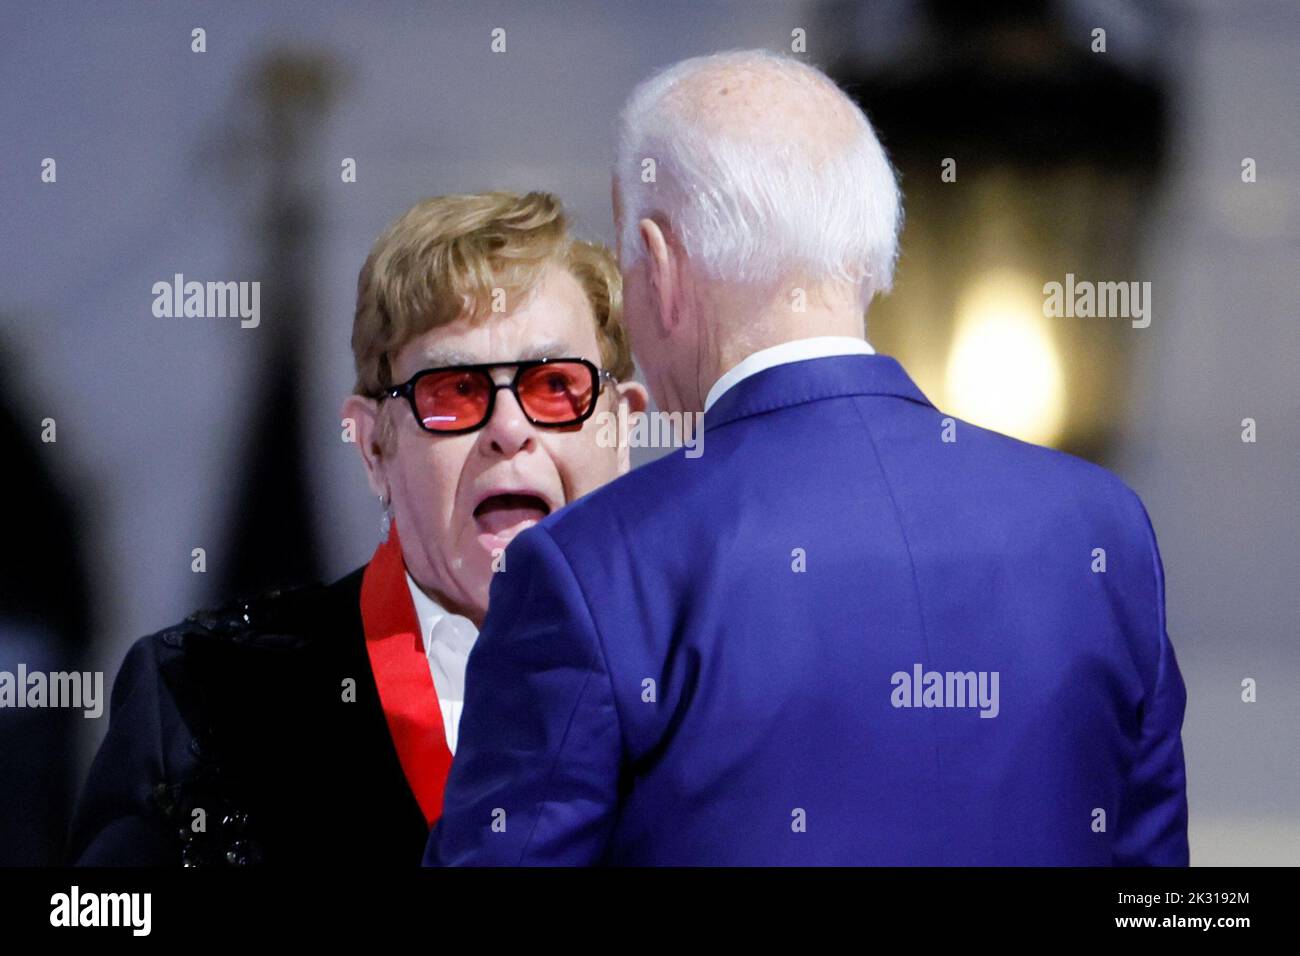 British rocker Elton John is awarded the National Humanities Medal by U.S. President Joe Biden at the White House in Washington, U.S., September 23, 2022. REUTERS/Evelyn Hockstein     TPX IMAGES OF THE DAY Stock Photo